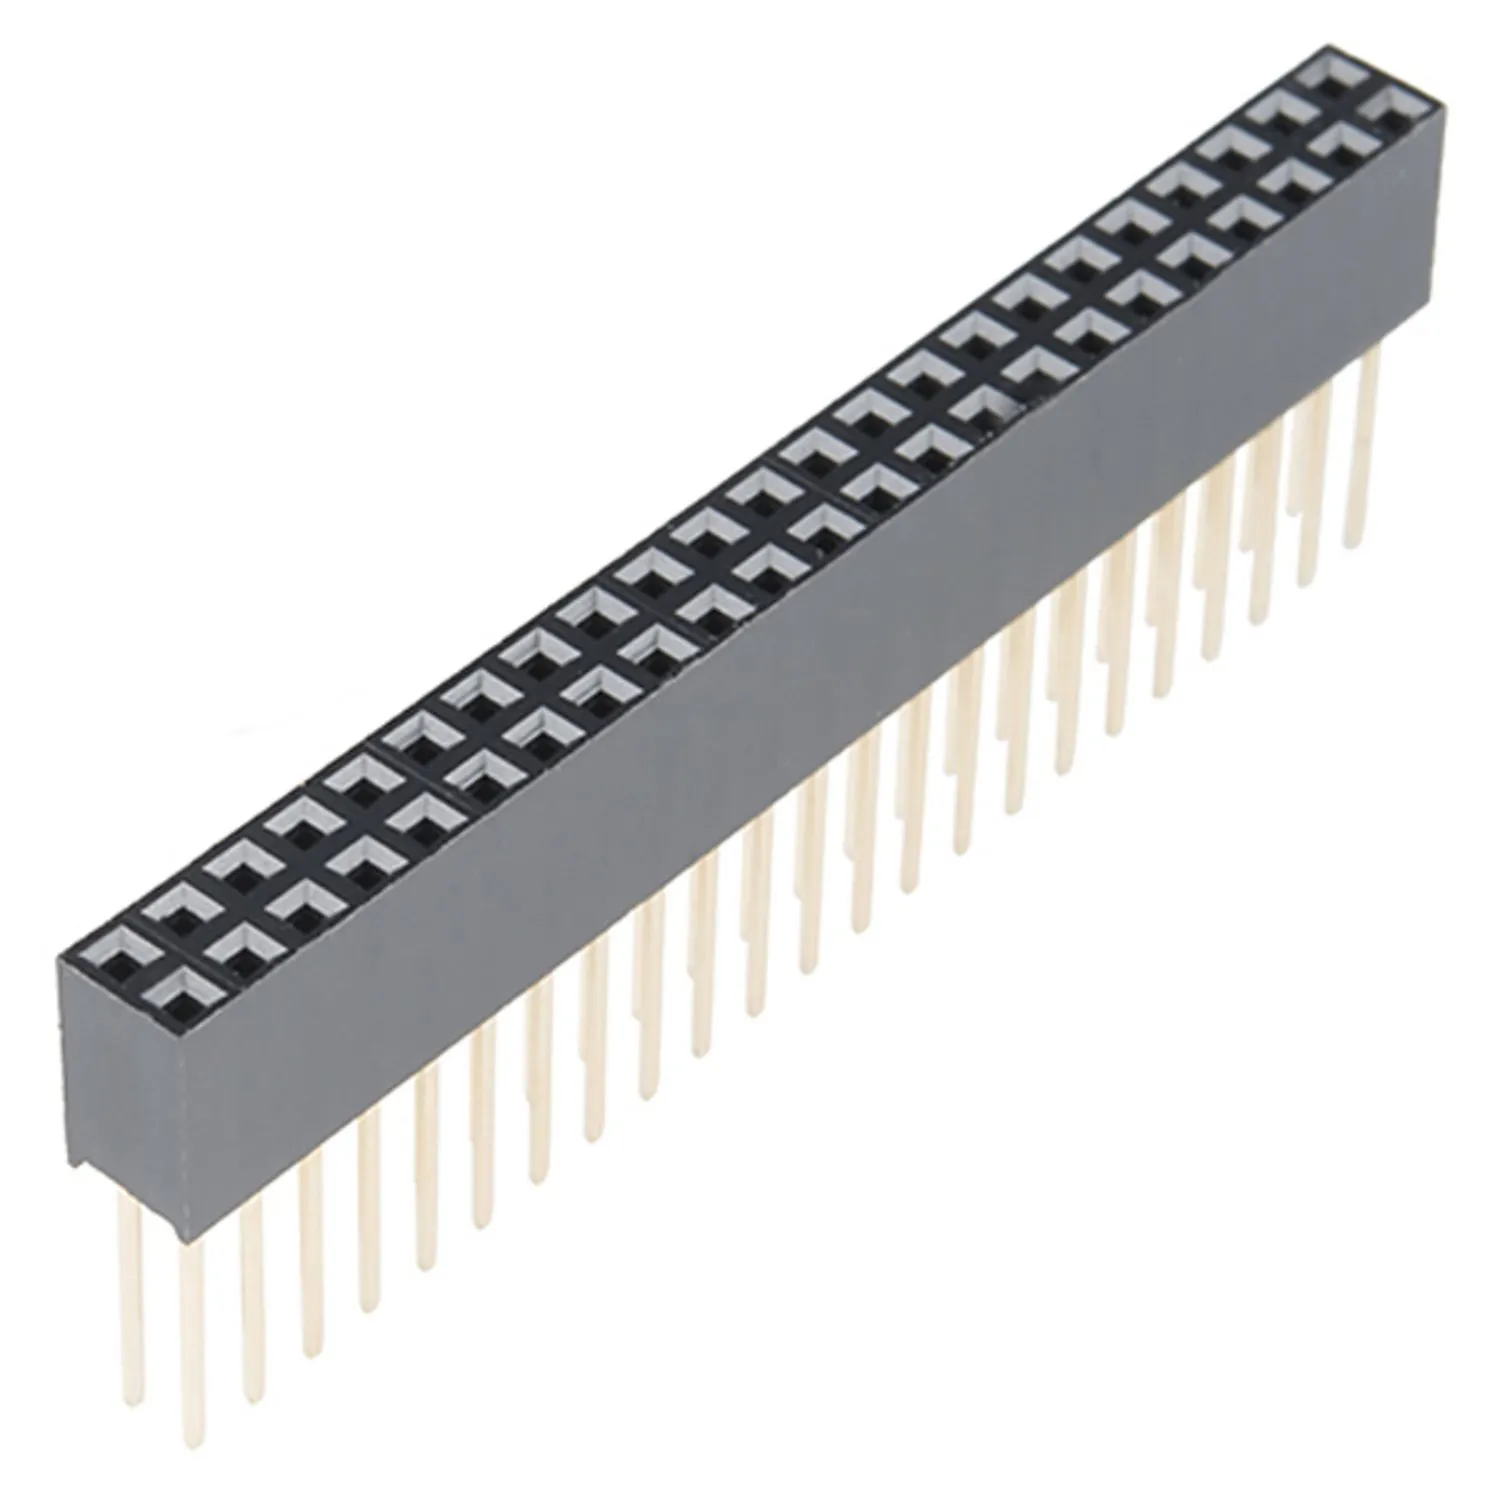 Photo of Stackable Header - 2x23 Pin Female